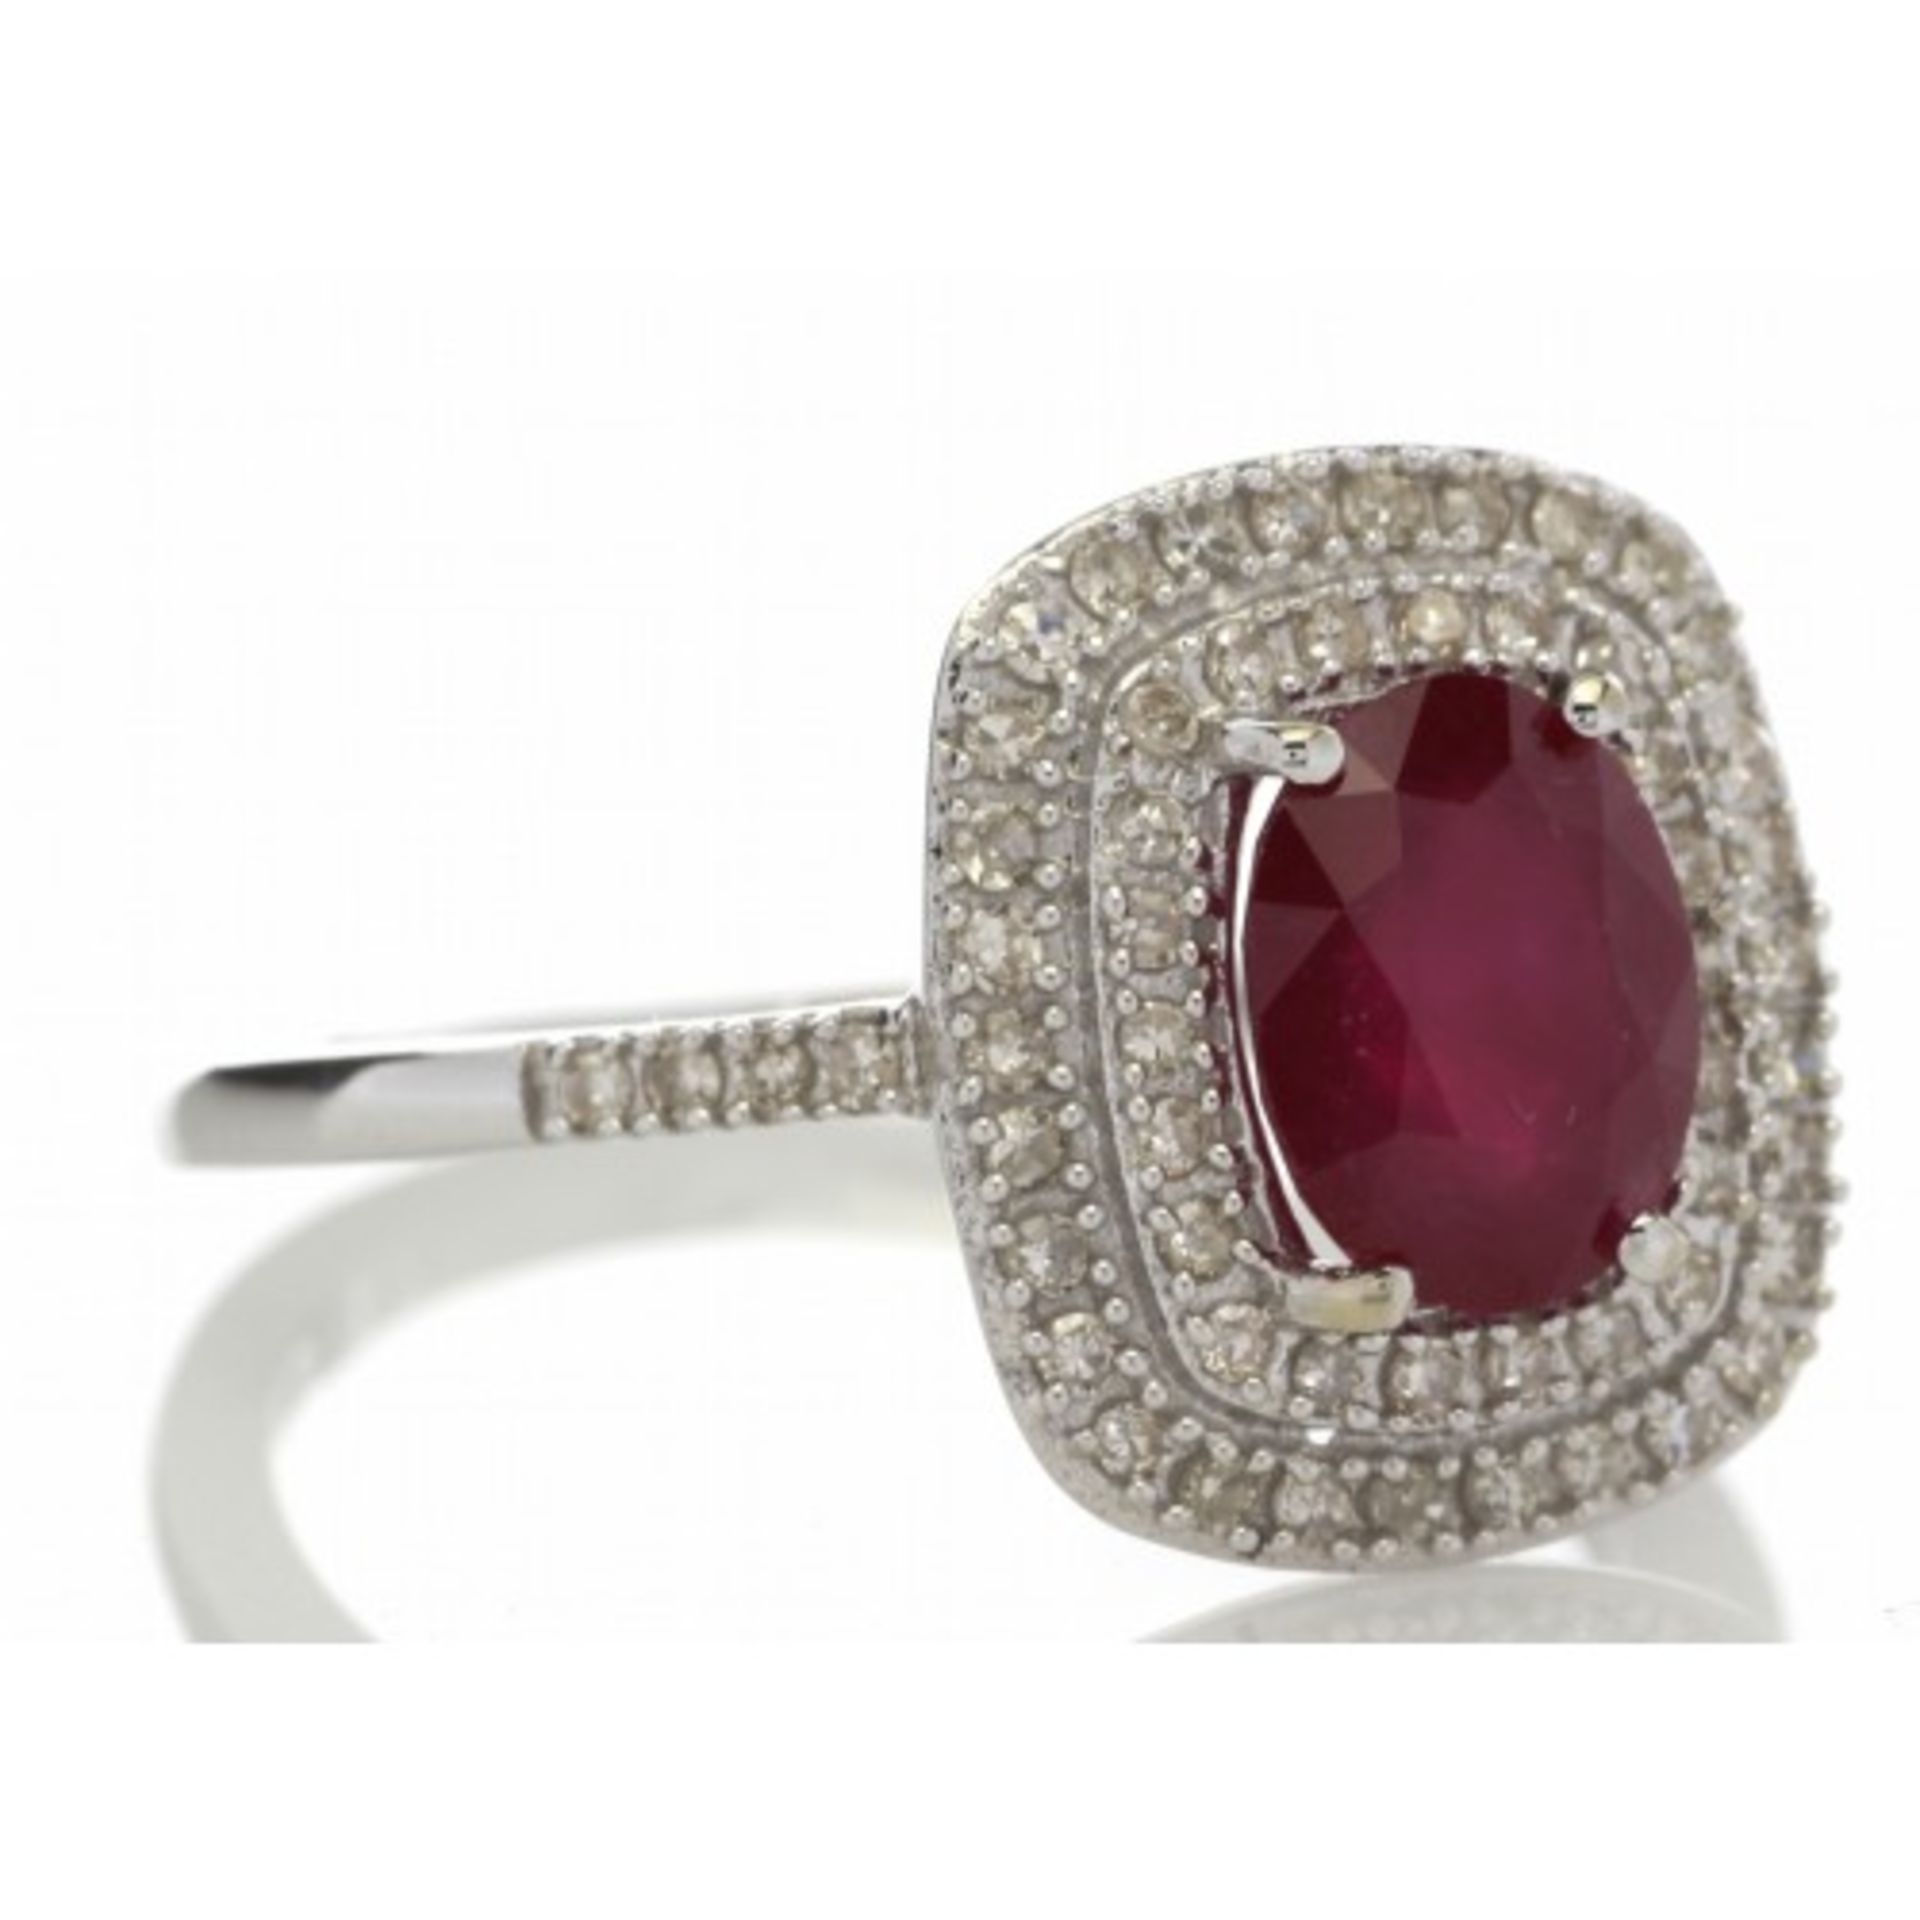 Ruby and diamond cluster dress ring set in 14ct gold. 1.54ct Oval cut ruby surrounded with a - Image 4 of 5